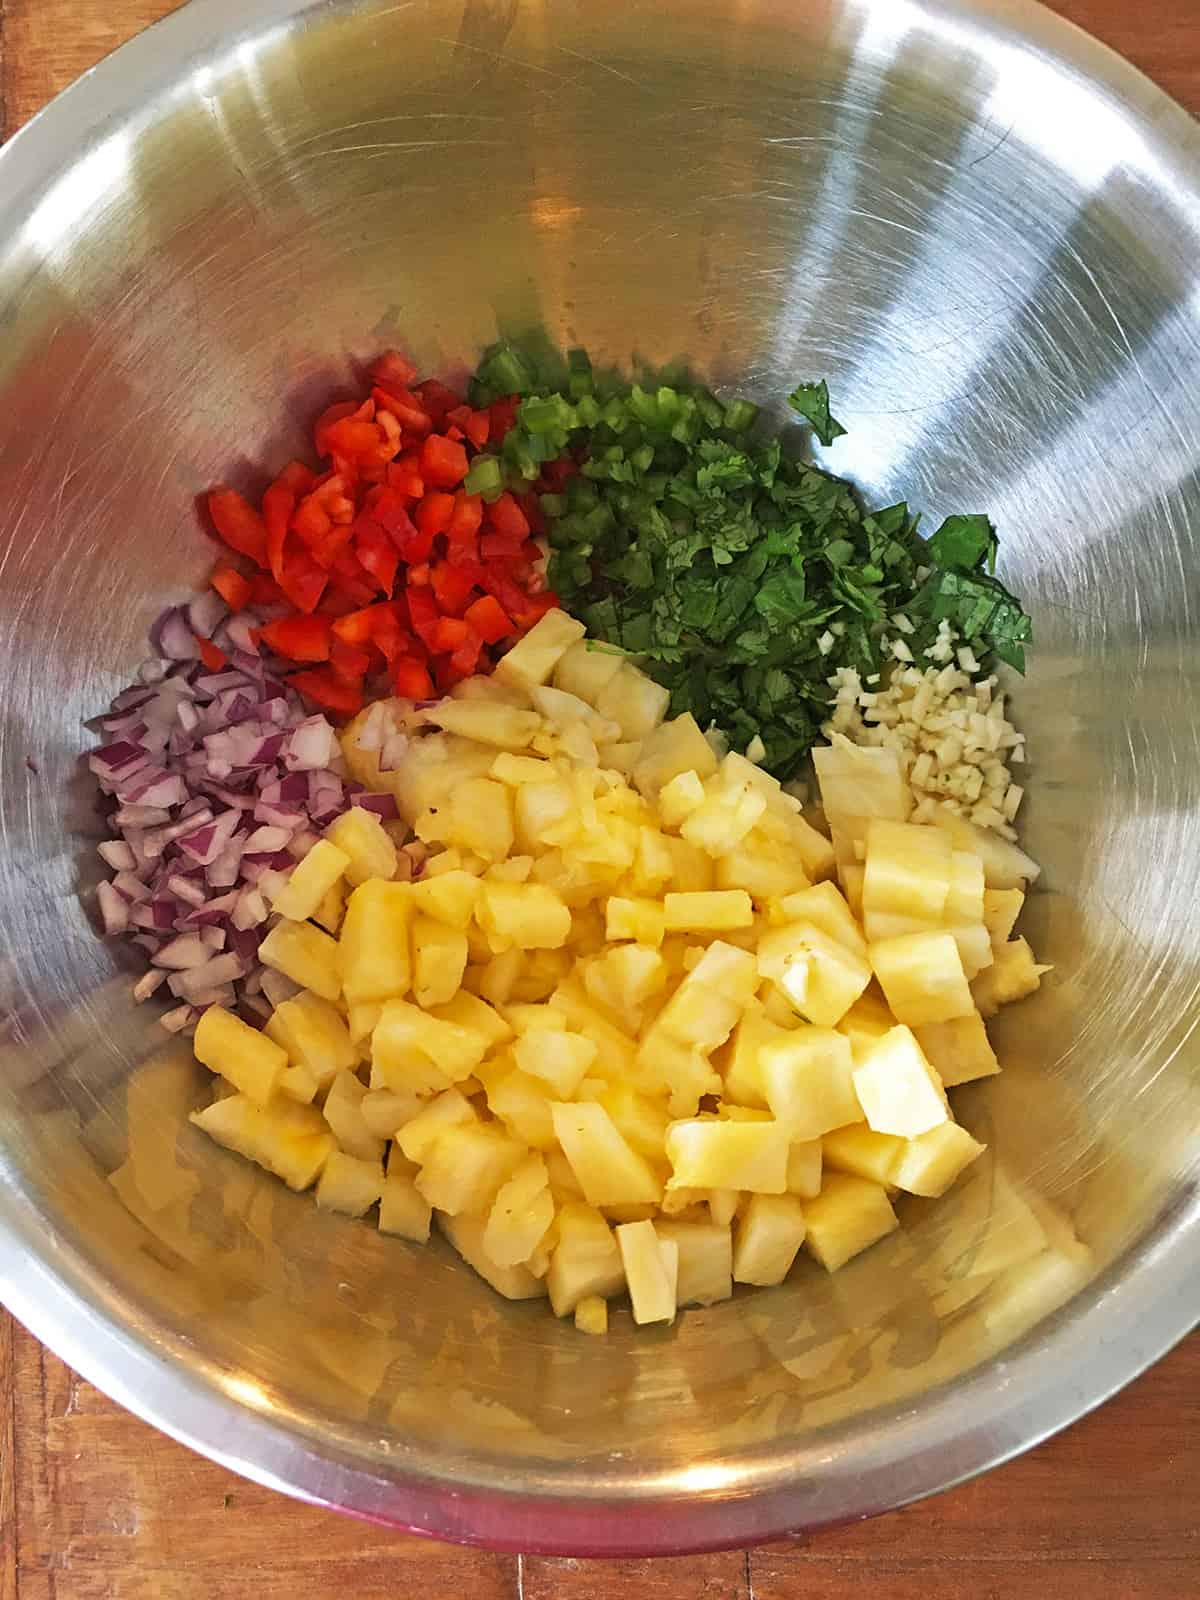 Chopped pineapple salsa ingredients in a stainless steel mixing bowl